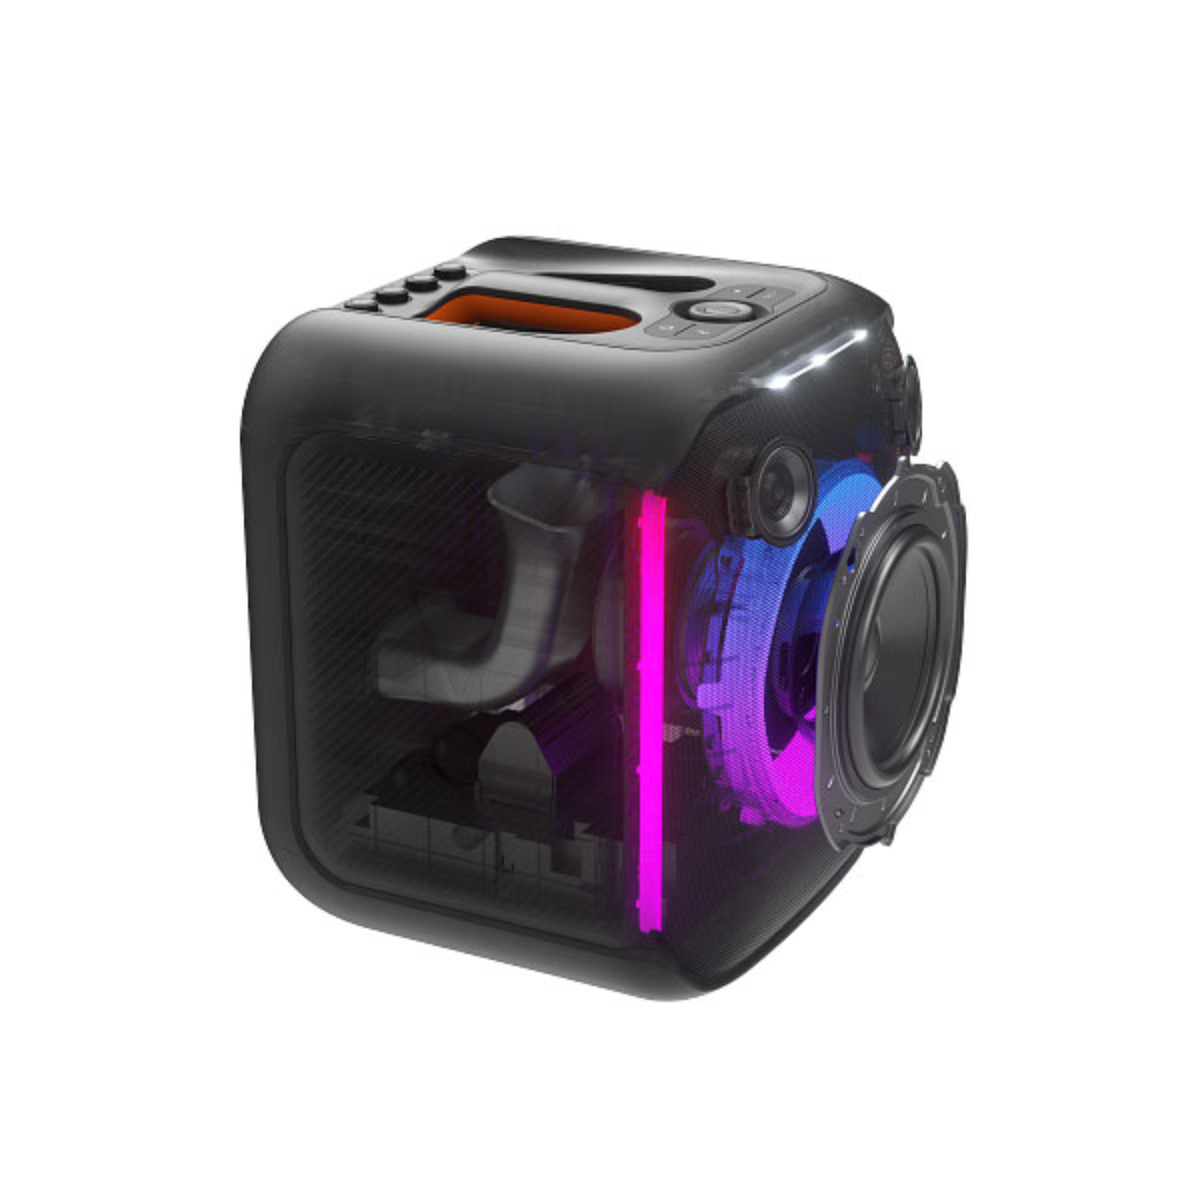 JBL Partybox Encore Portable party speaker with 100W powerful sound, built-in dynamic light show, included digital wireless mic, and splash proof design.